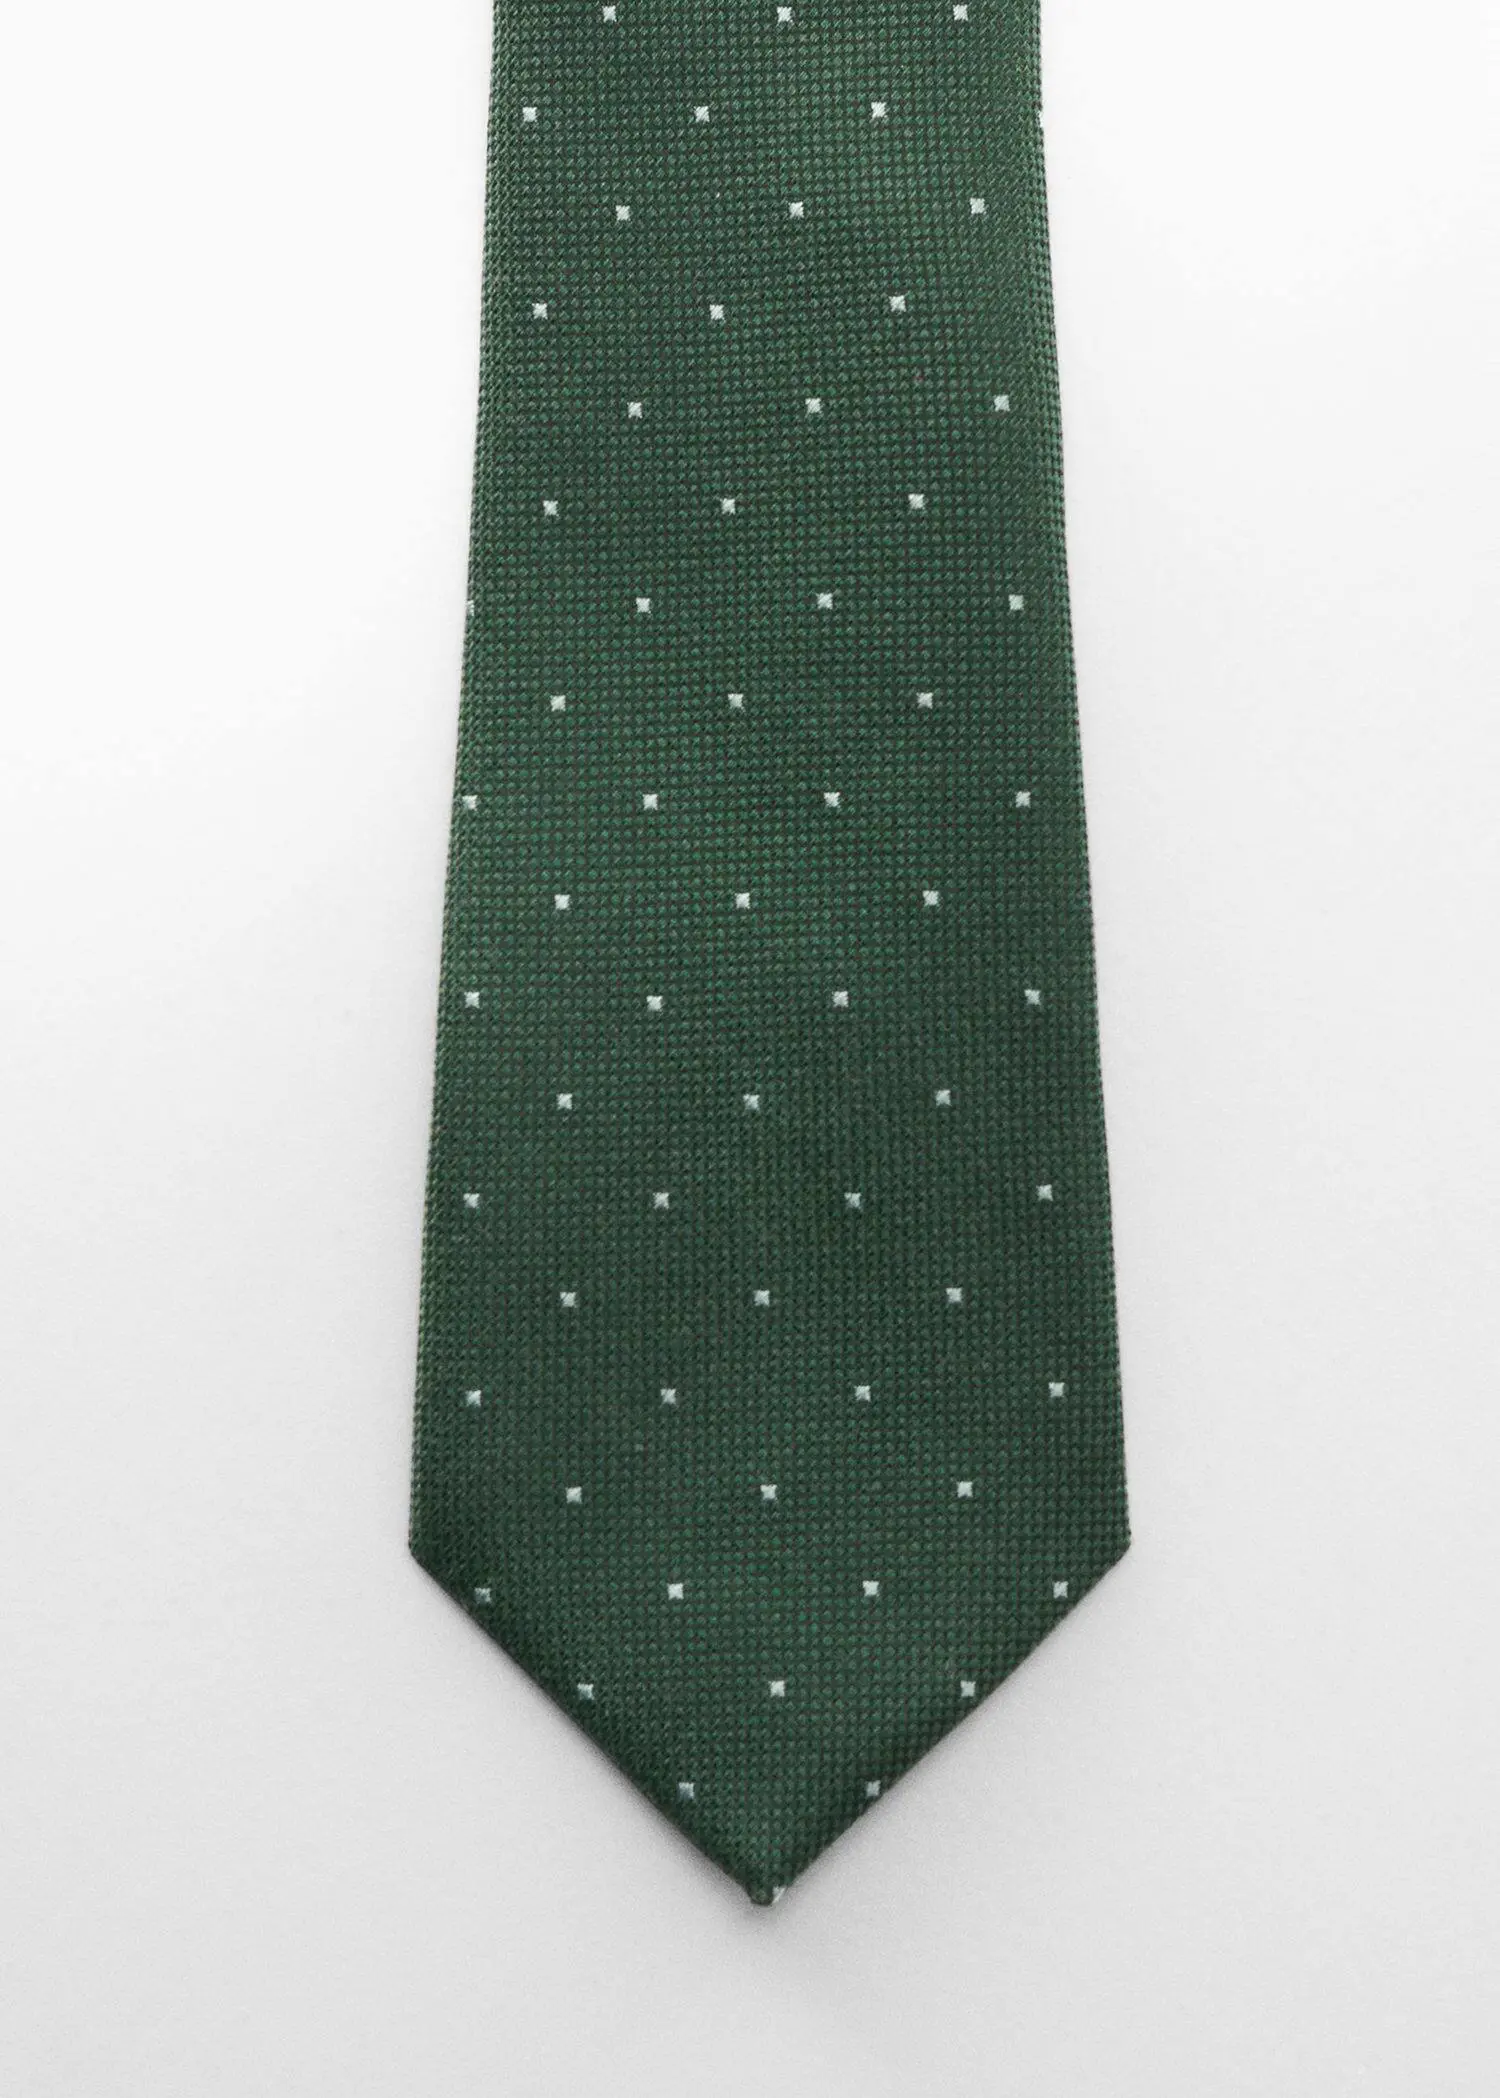 Mango Tie with micro polka-dot structure. a green neck tie with white polka dots. 